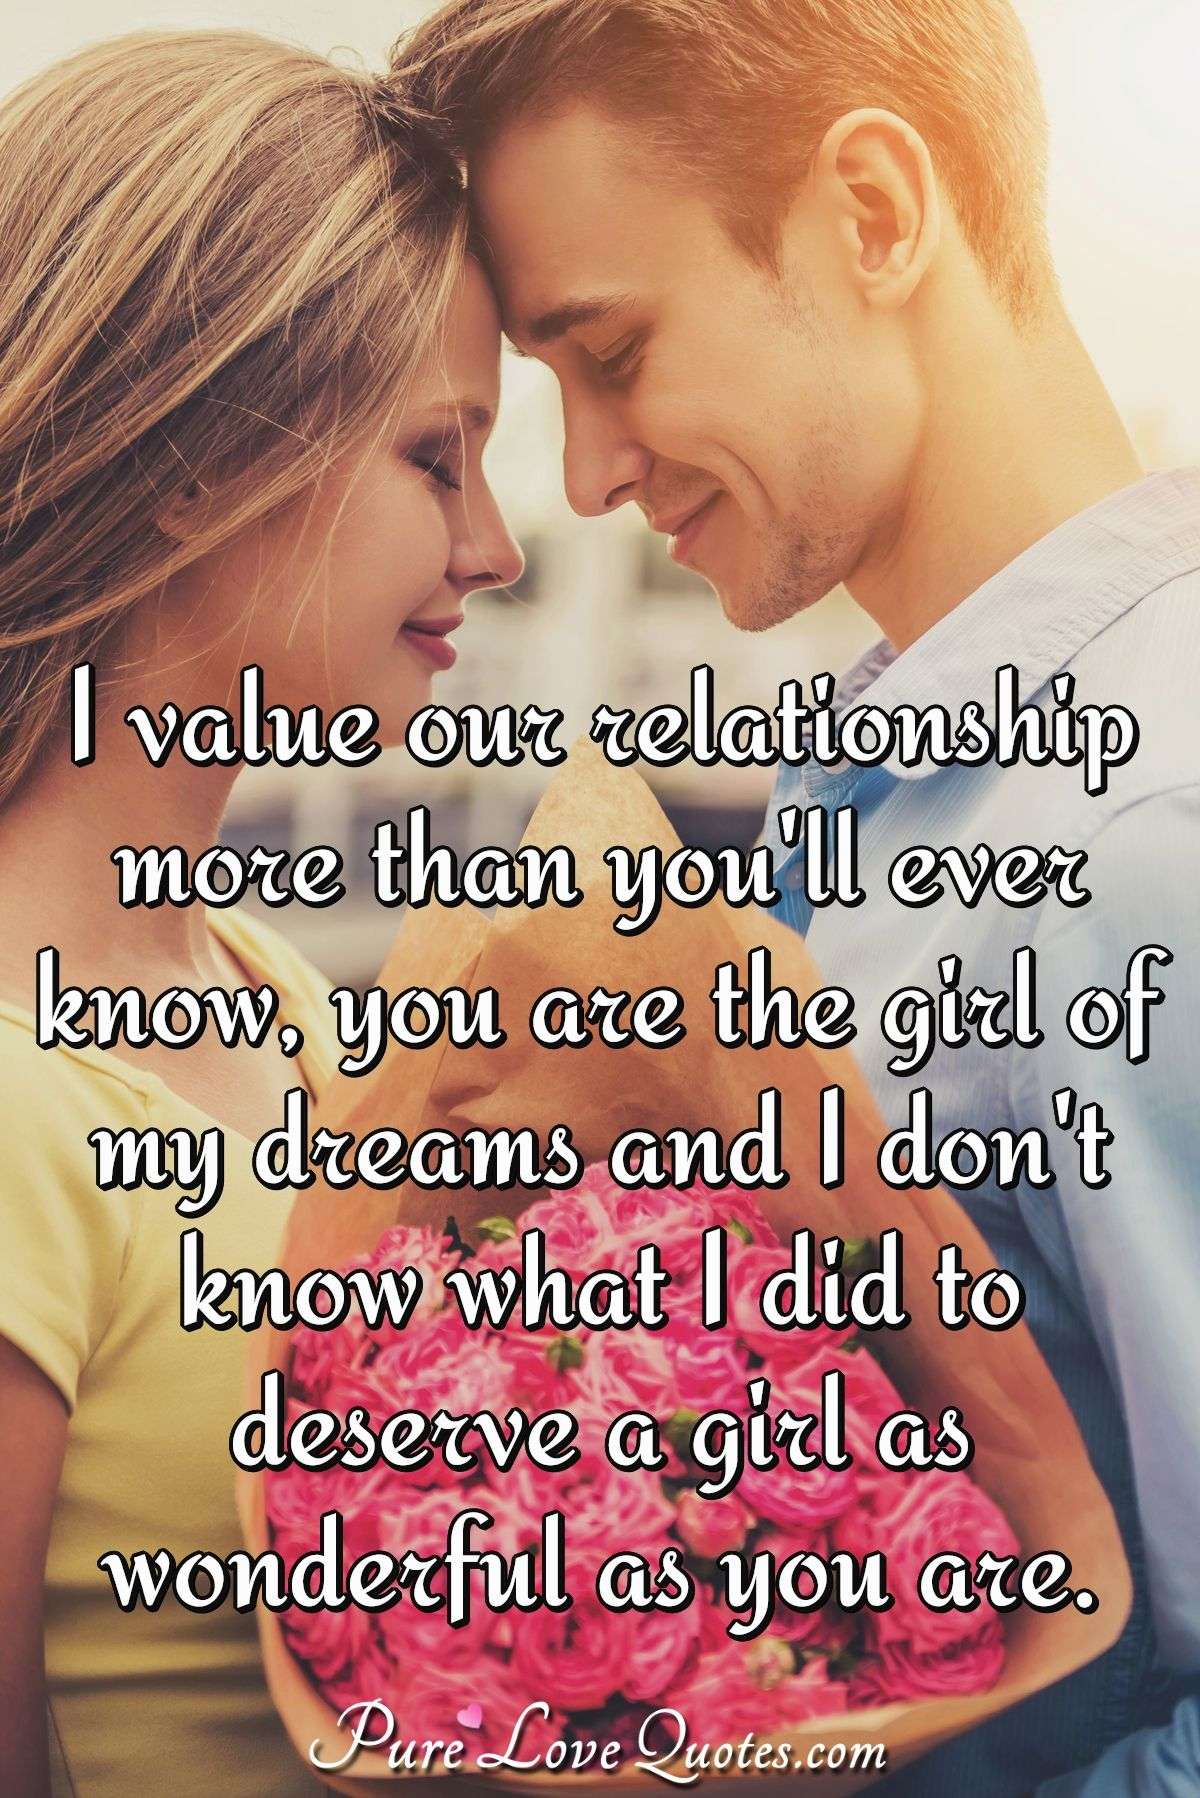 deep quotes for girlfriend